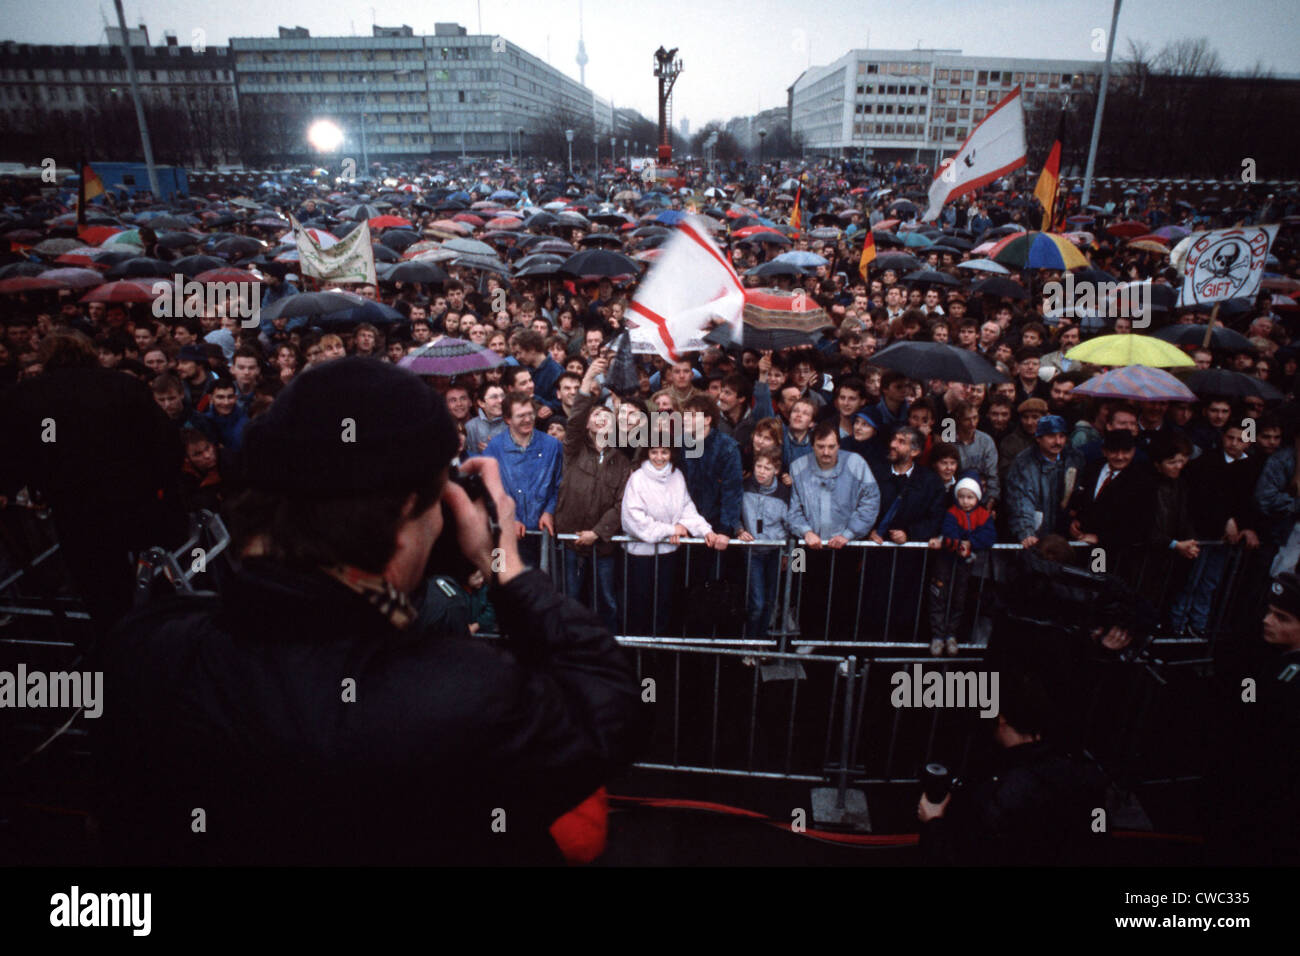 East Germans brave the weather for the official opening of the Brandenburg Gate. Dec. 22 1989. (BSLOC 2011 3 48) Stock Photo